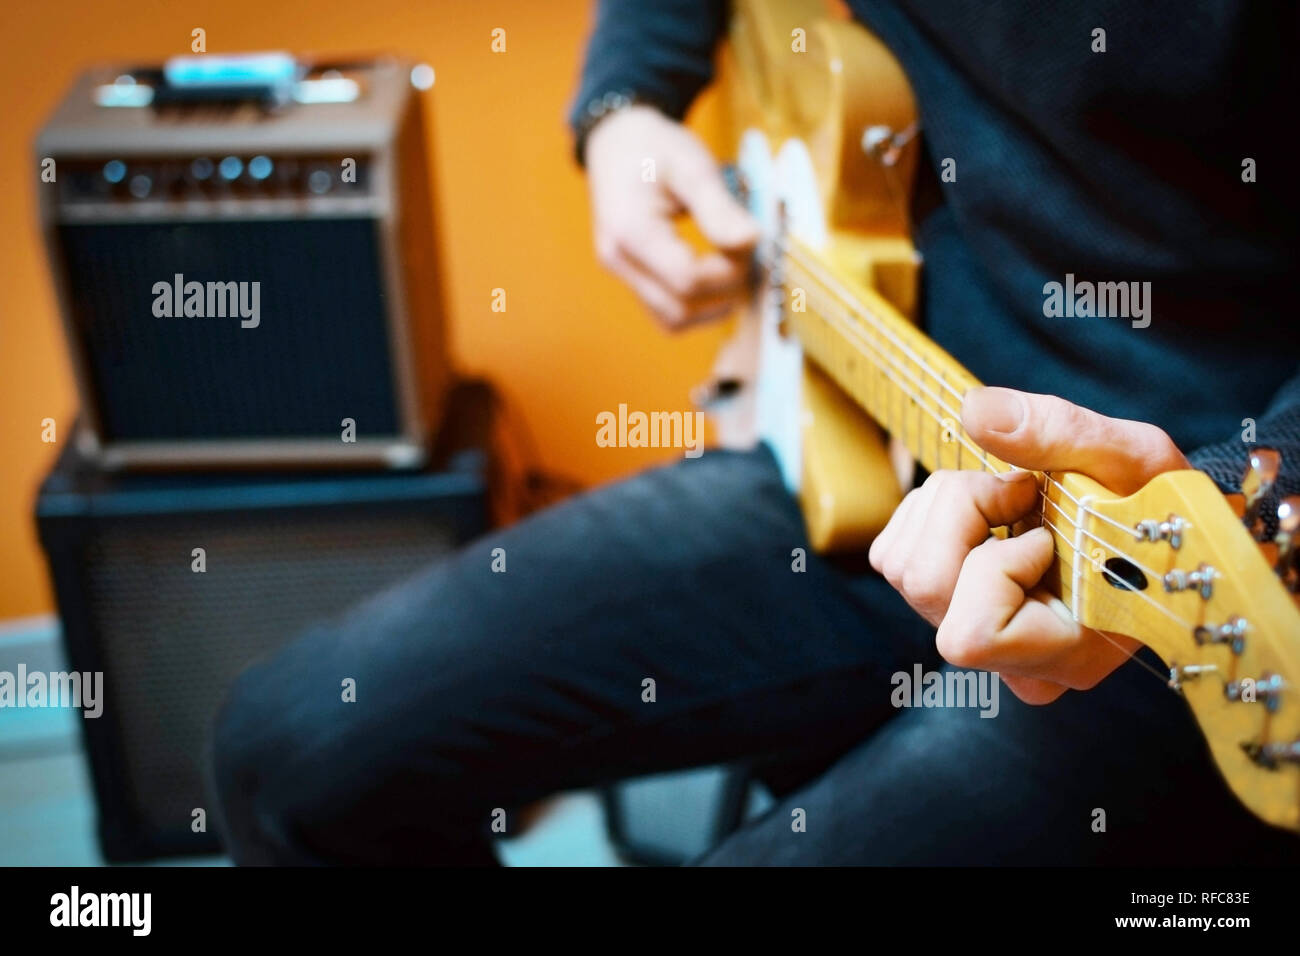 Man practicing electric guitar playing with amplifiers at home. Guitar lesson. Trying guitar at store. Stock Photo